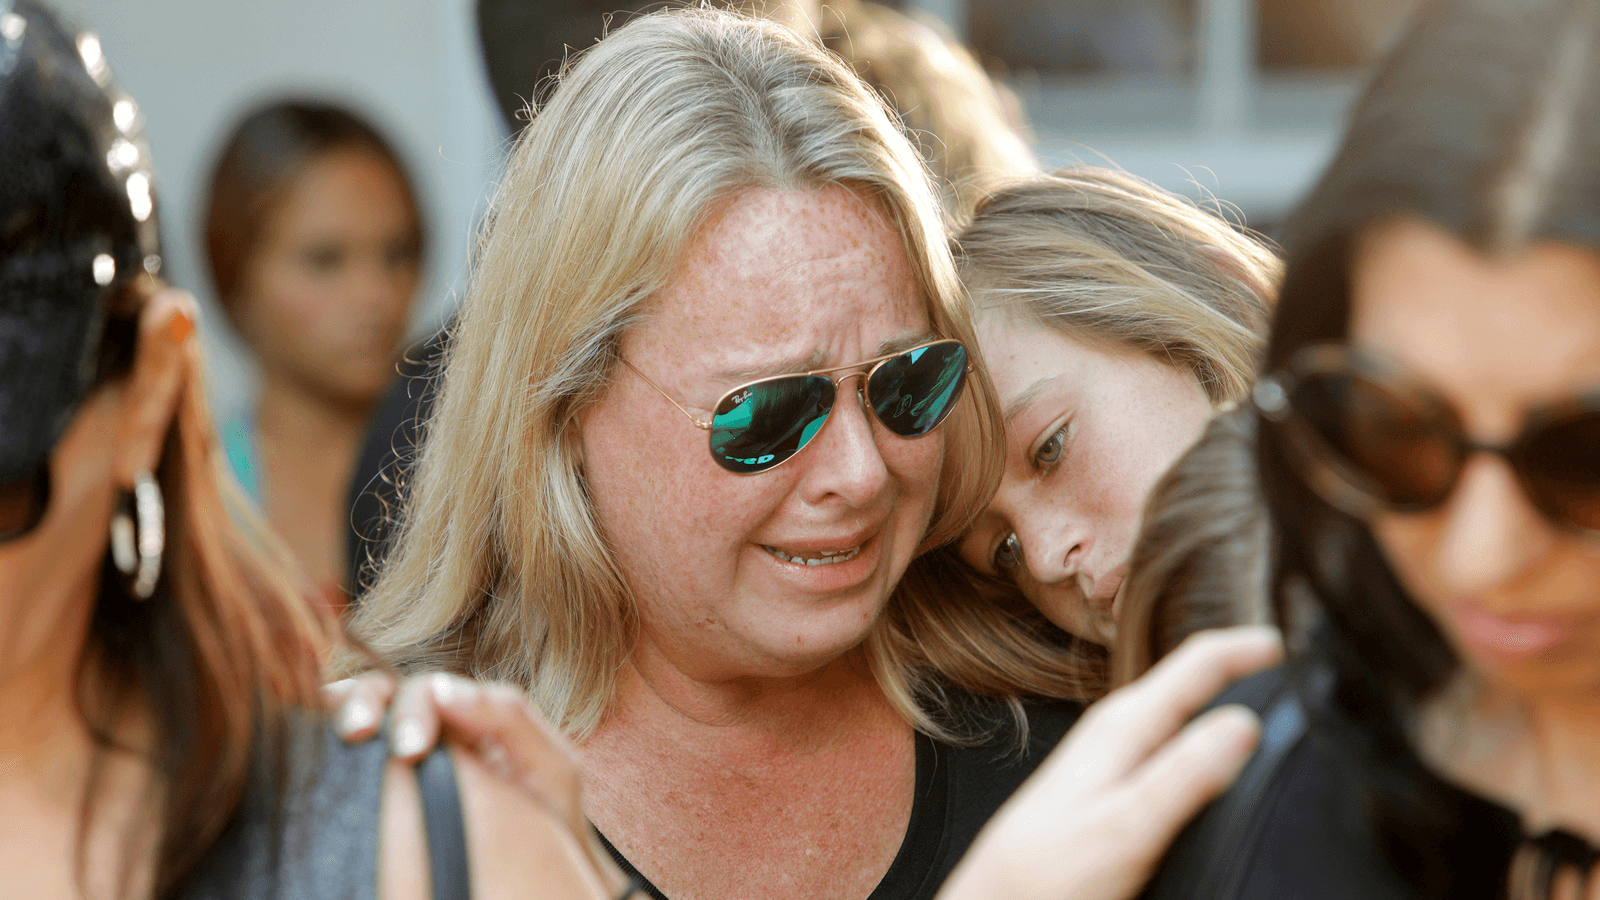 Mourners react during a community prayer vigil for victims of yesterday's shooting at nearby Marjory Stoneman Douglas High School in Parkland, at Parkridge Church in Pompano Beach, Florida, Feb. 15, 2018.